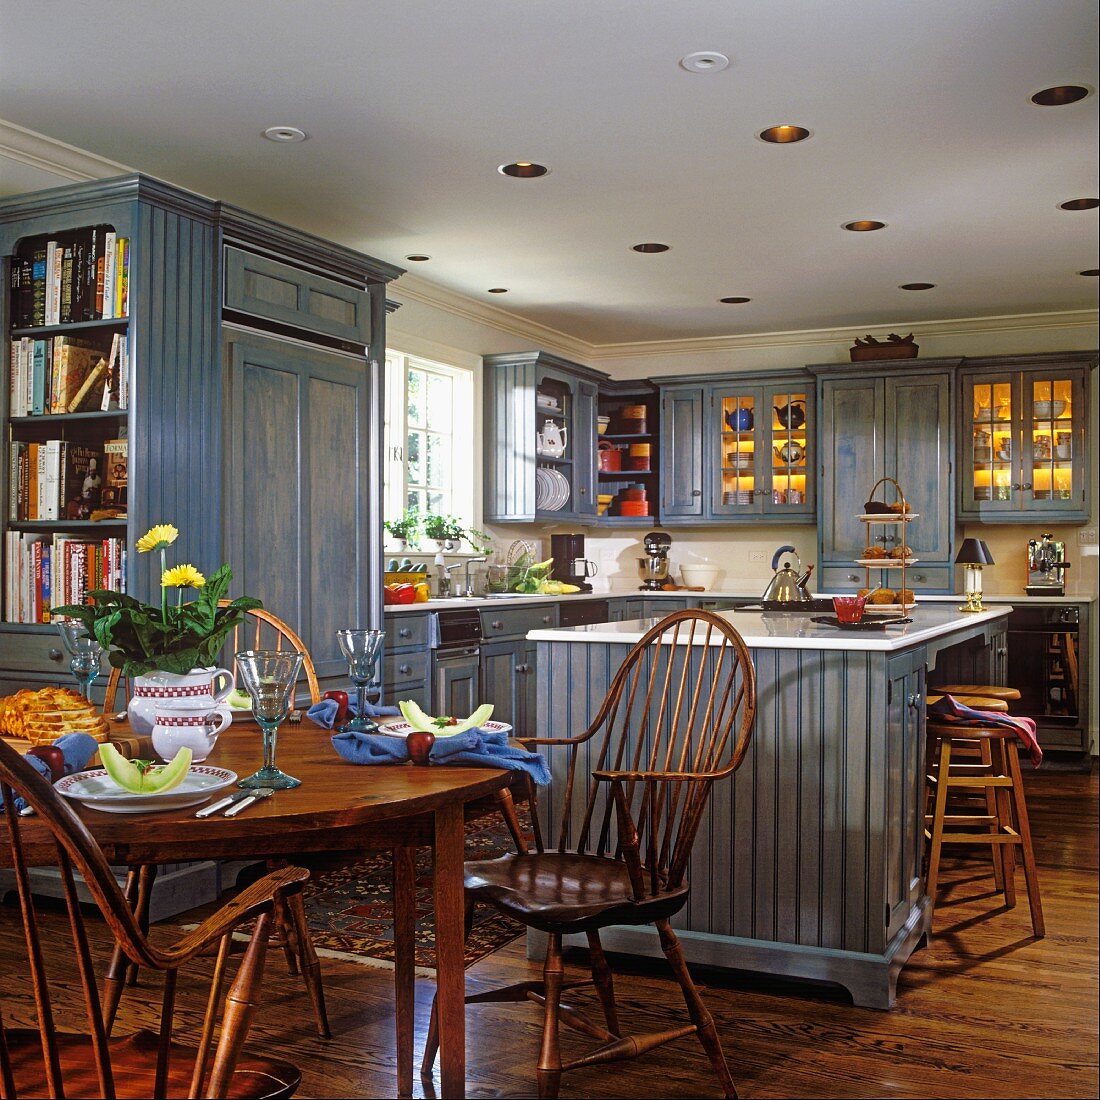 Open-plan kitchen with round dining table, wooden chairs and blue kitchen cupboards